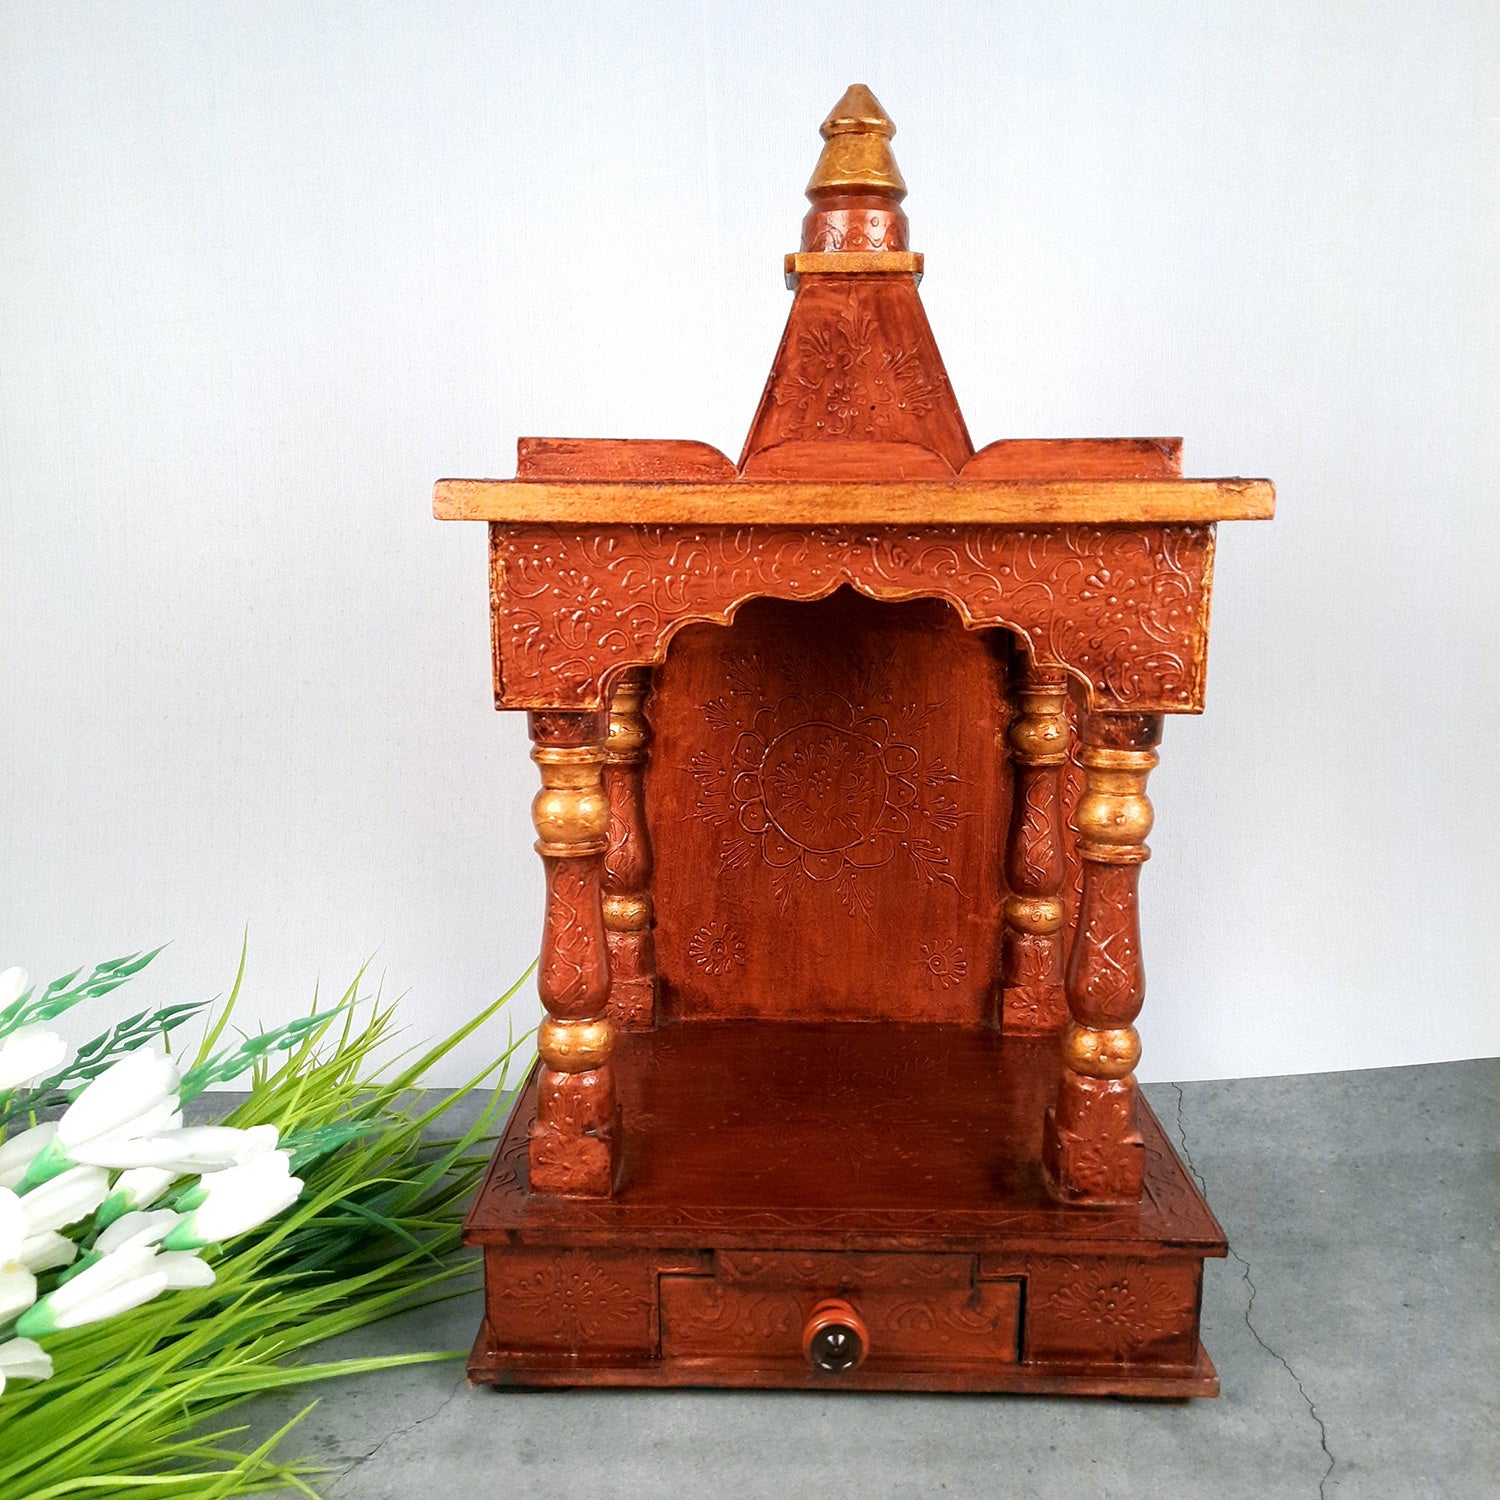 Handcrafted Wooden Temple Mandir For